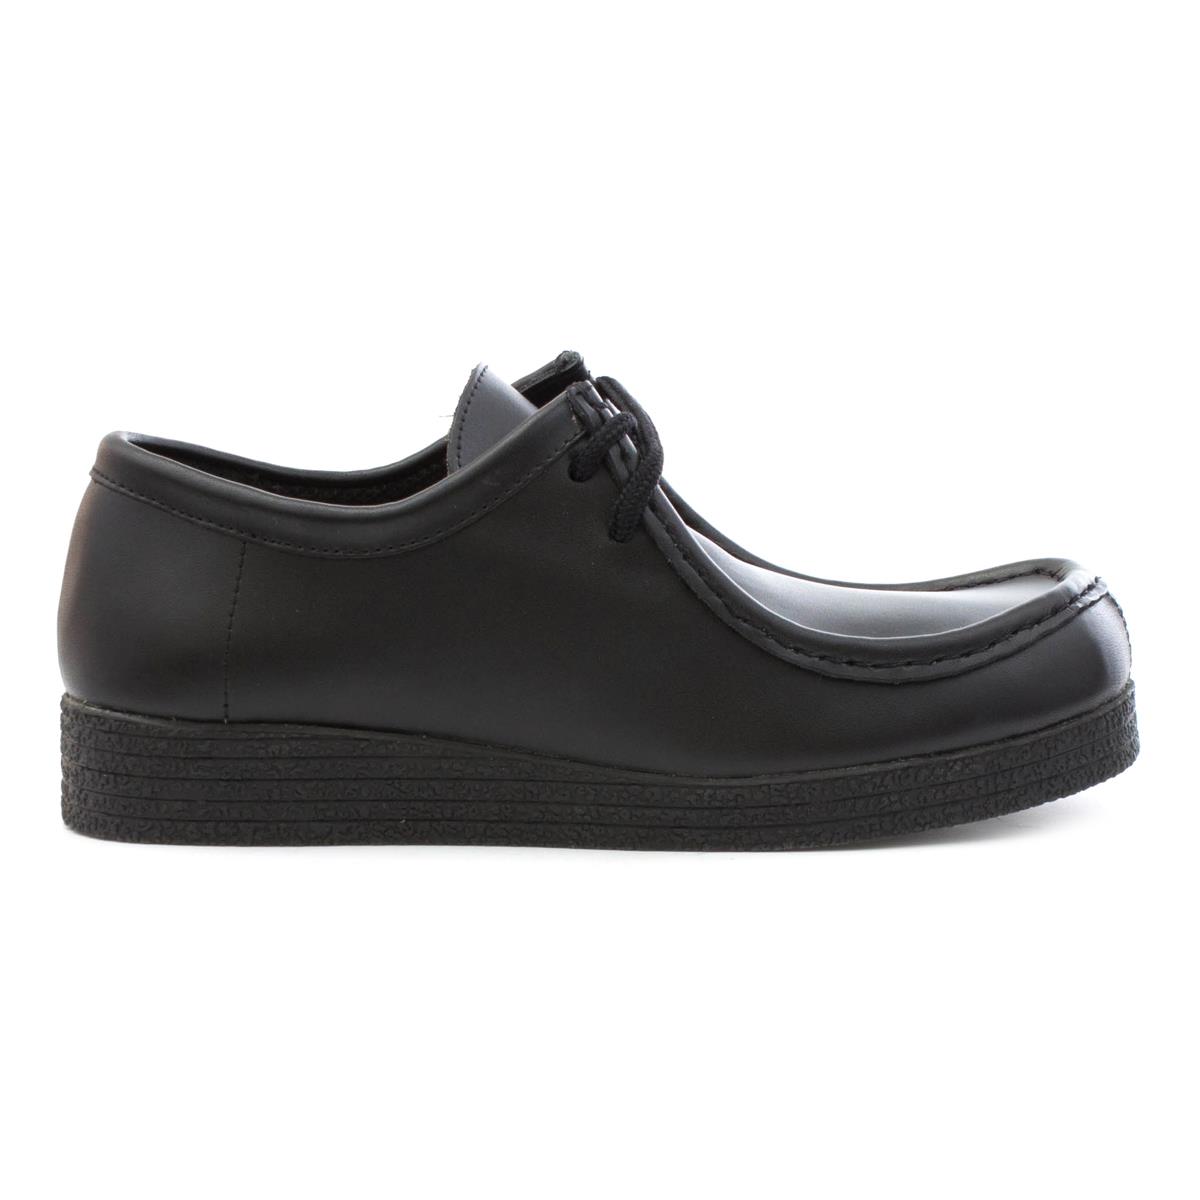 wallabees shoes shoe zone off 57% - www 